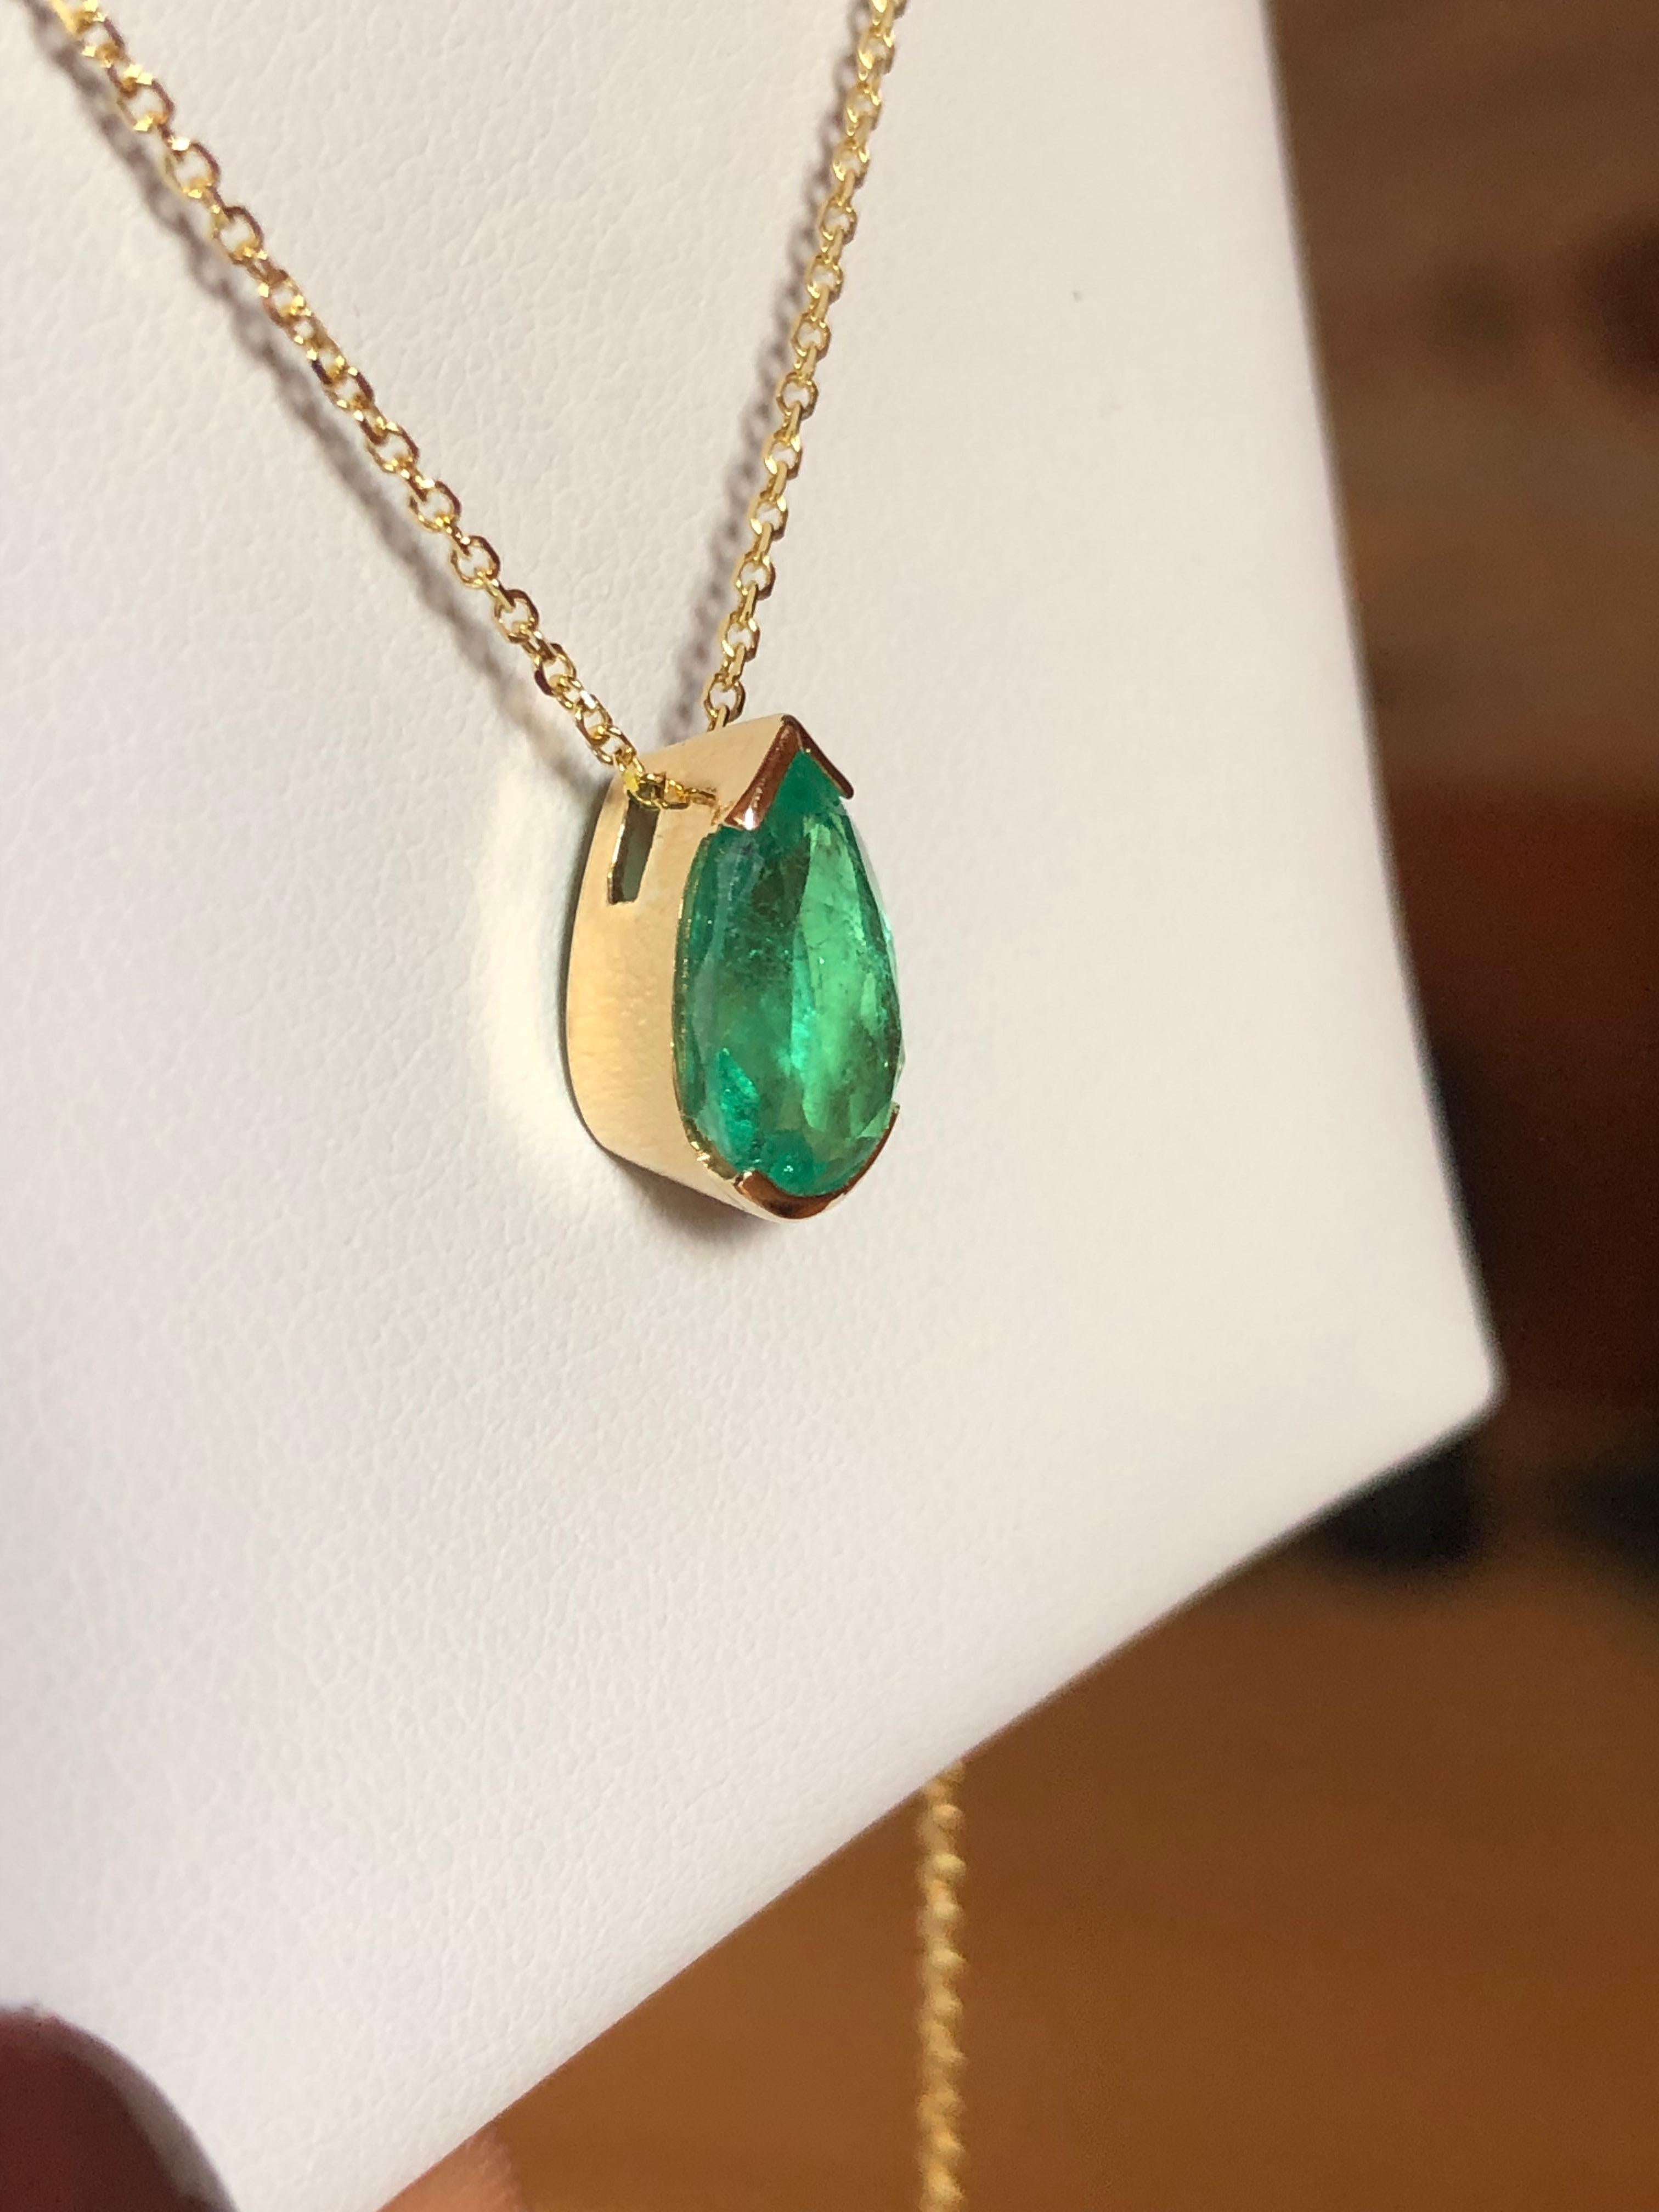 Natural Fine Colombian Emerald Pear Drop Pendant, crafted in an 18 Karat Gold bezel setting – designed to show the spectacular brilliance and beautiful medium green color and excellent transparency of this magnificent gemstone.  - Natural Colombian